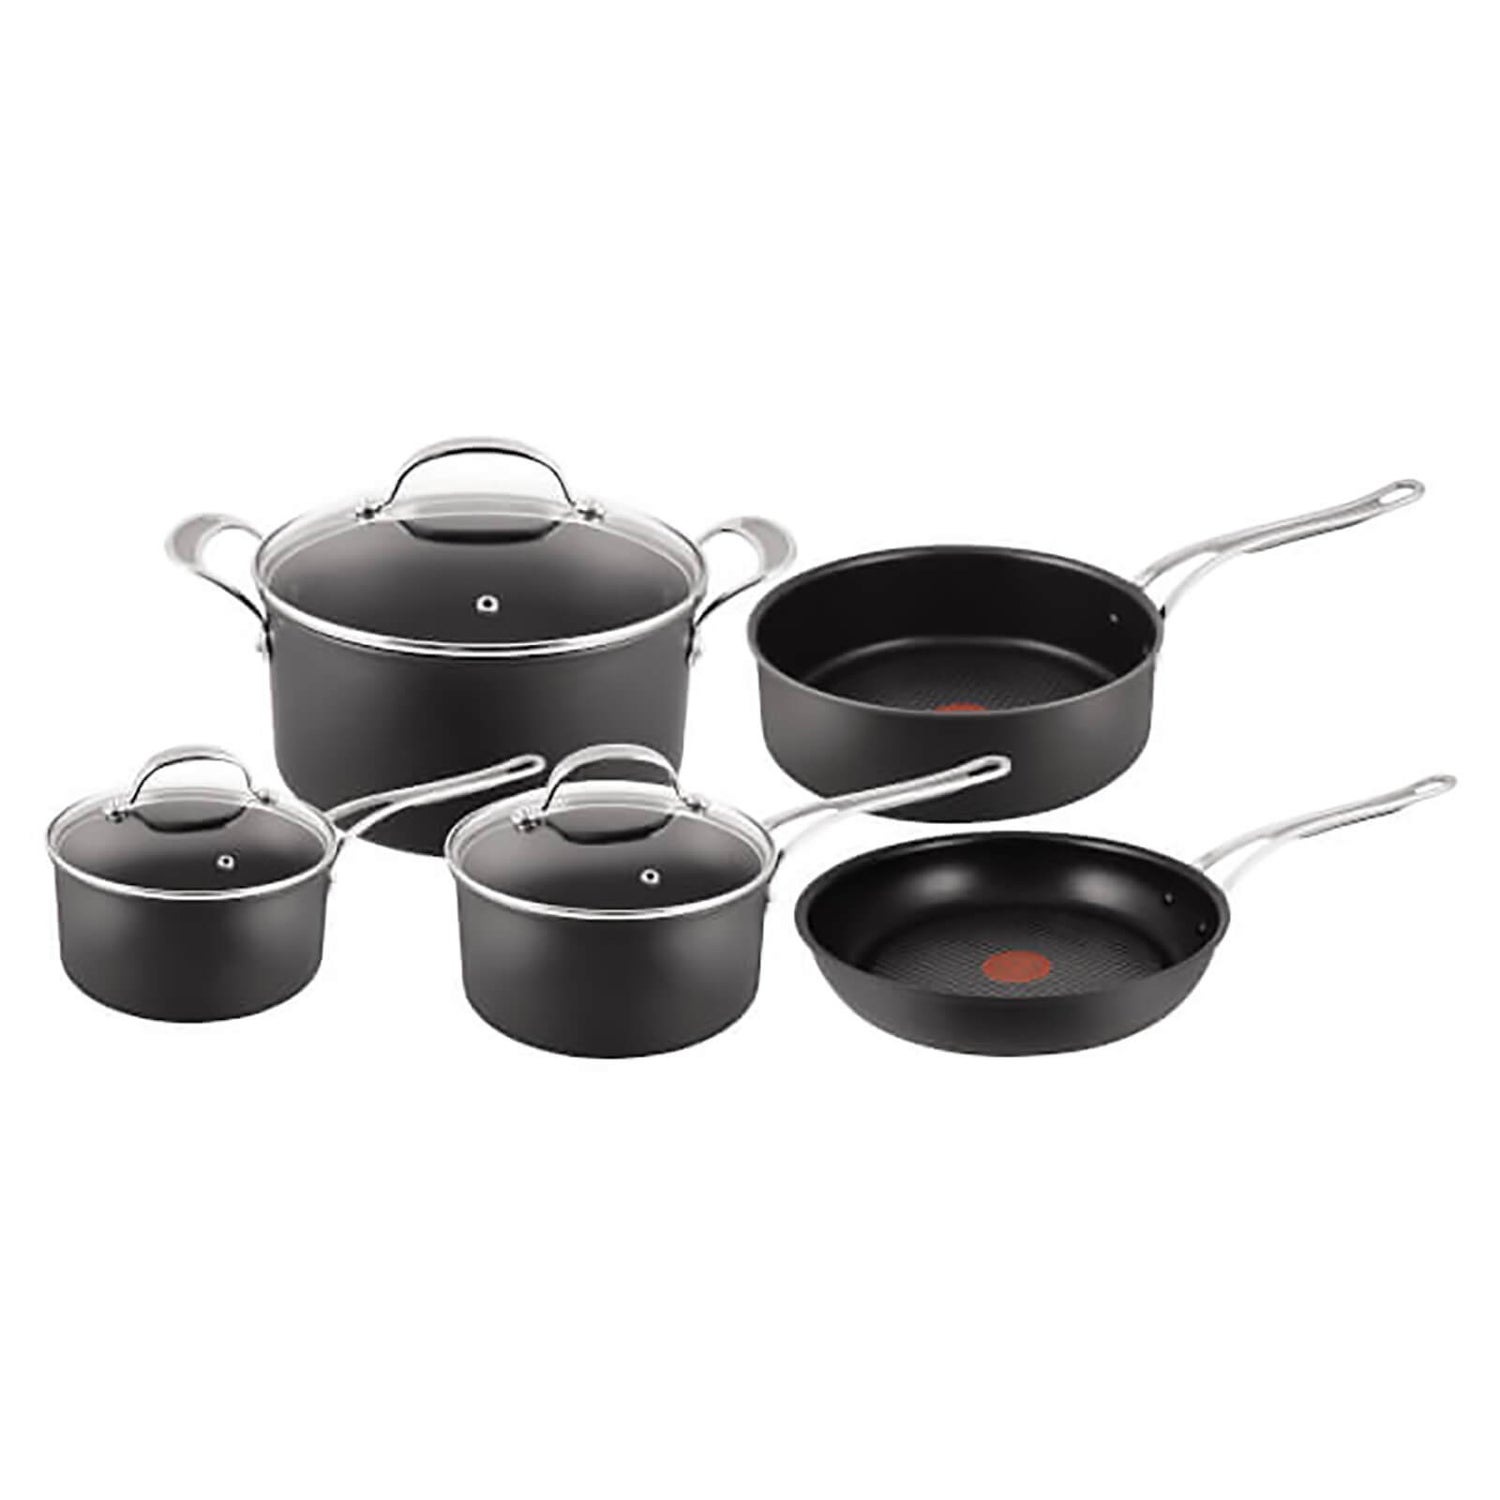 Jamie Oliver by Tefal Hard Anodised Non-Stick 5 Piece Cookware Set